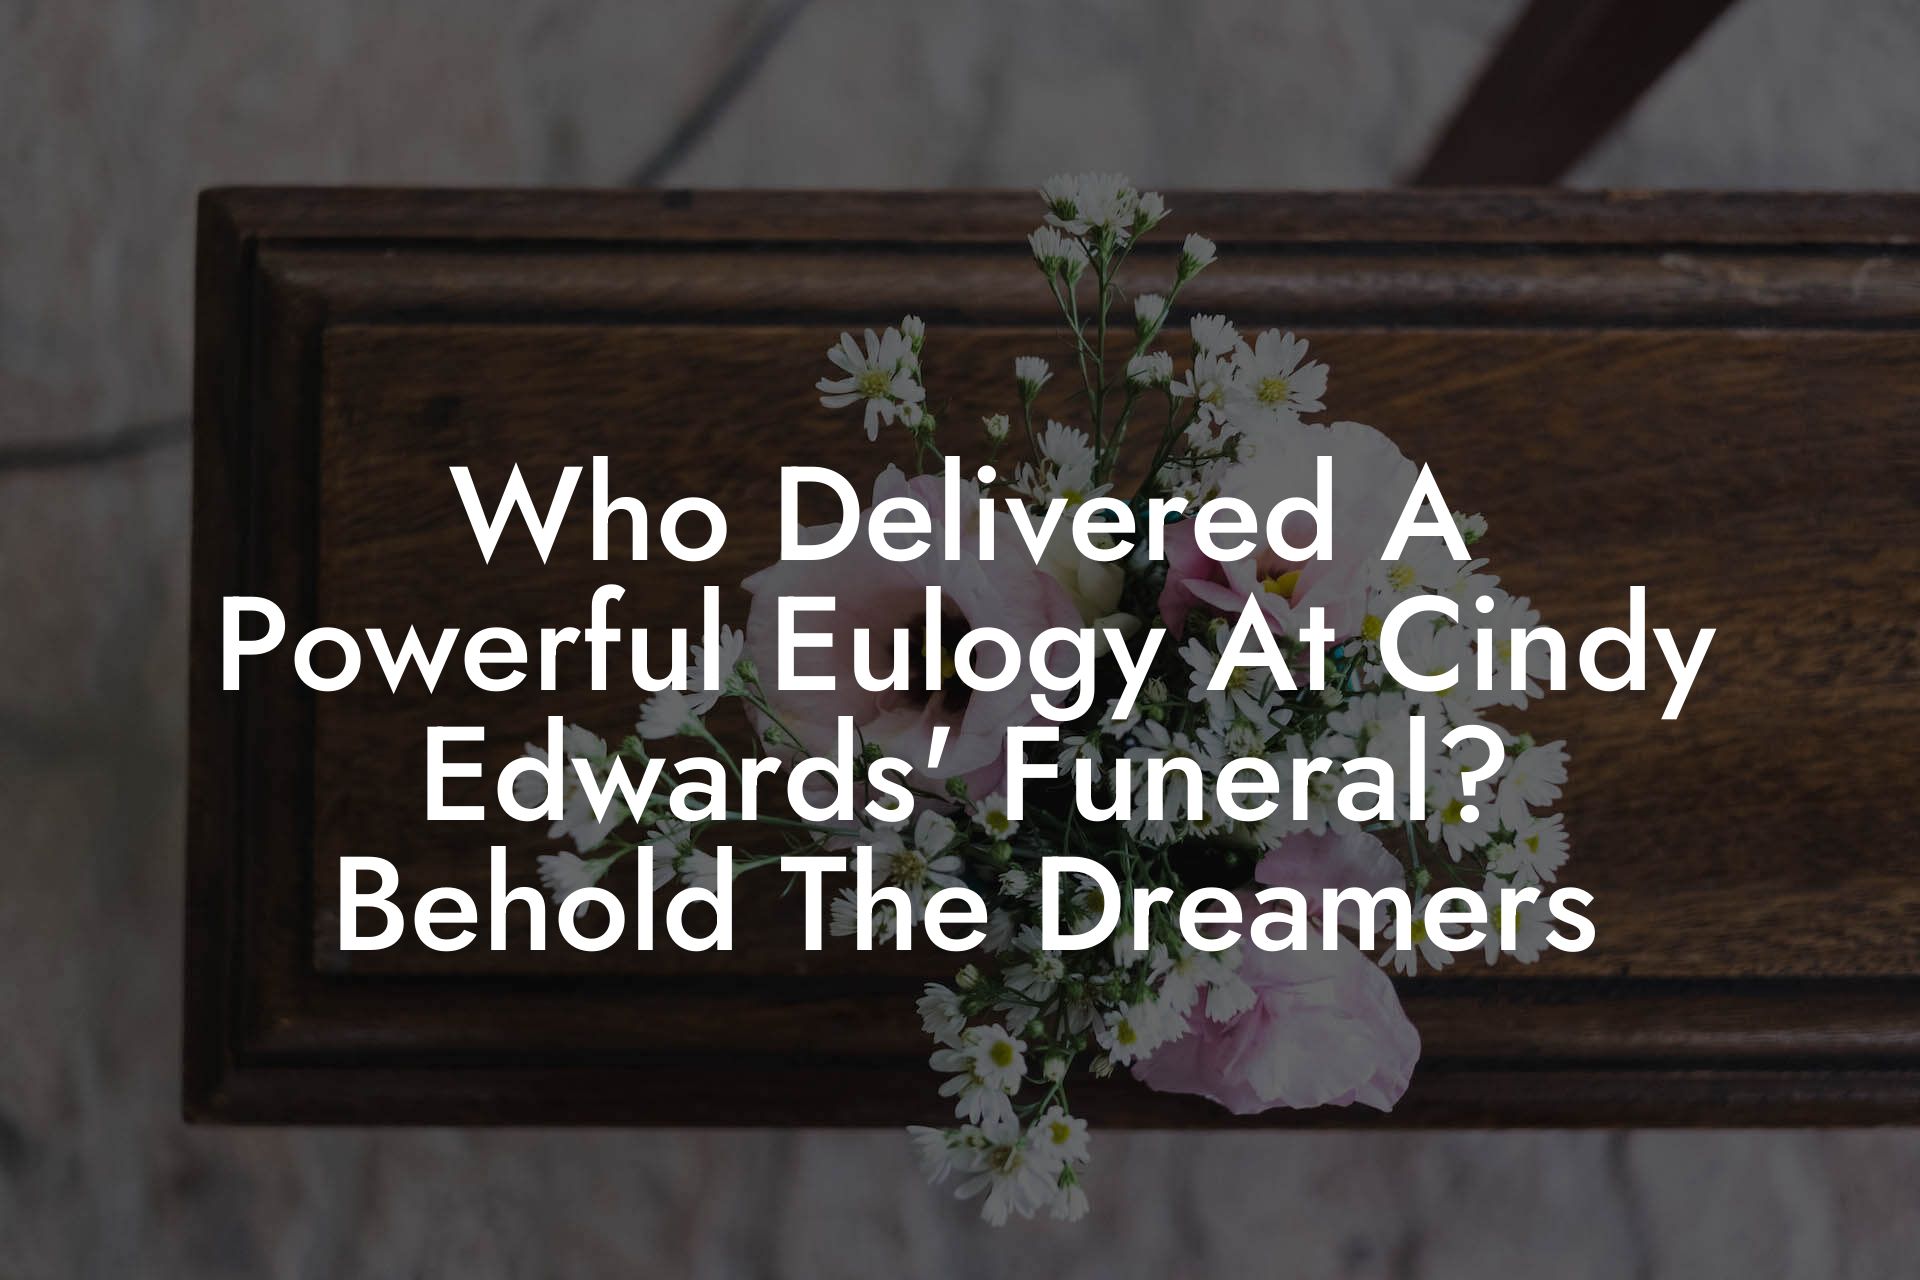 Who Delivered A Powerful Eulogy At Cindy Edwards' Funeral? Behold The Dreamers